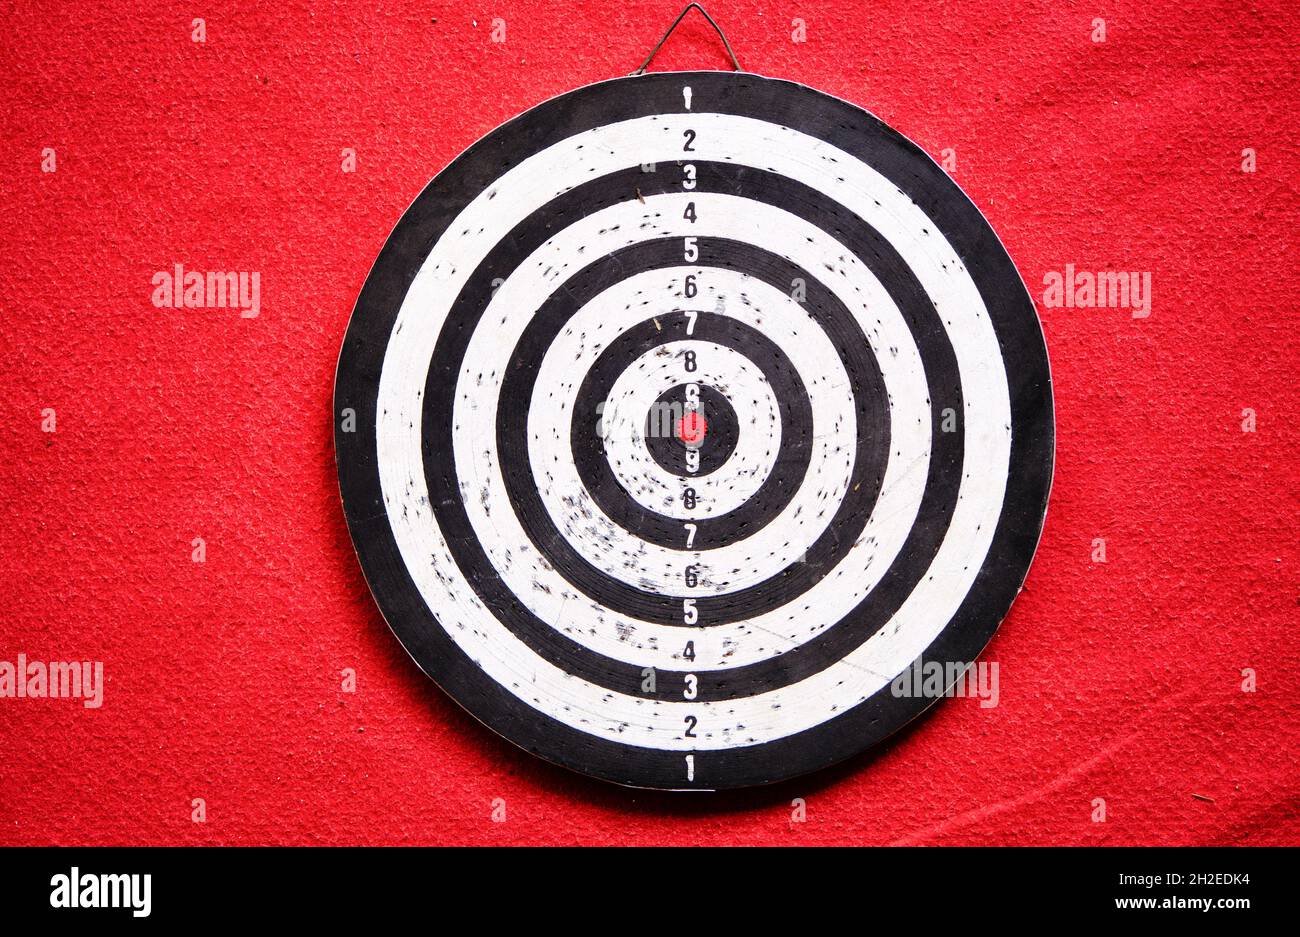 Used dart board standing on red carpet and its shadows. Stock Photo